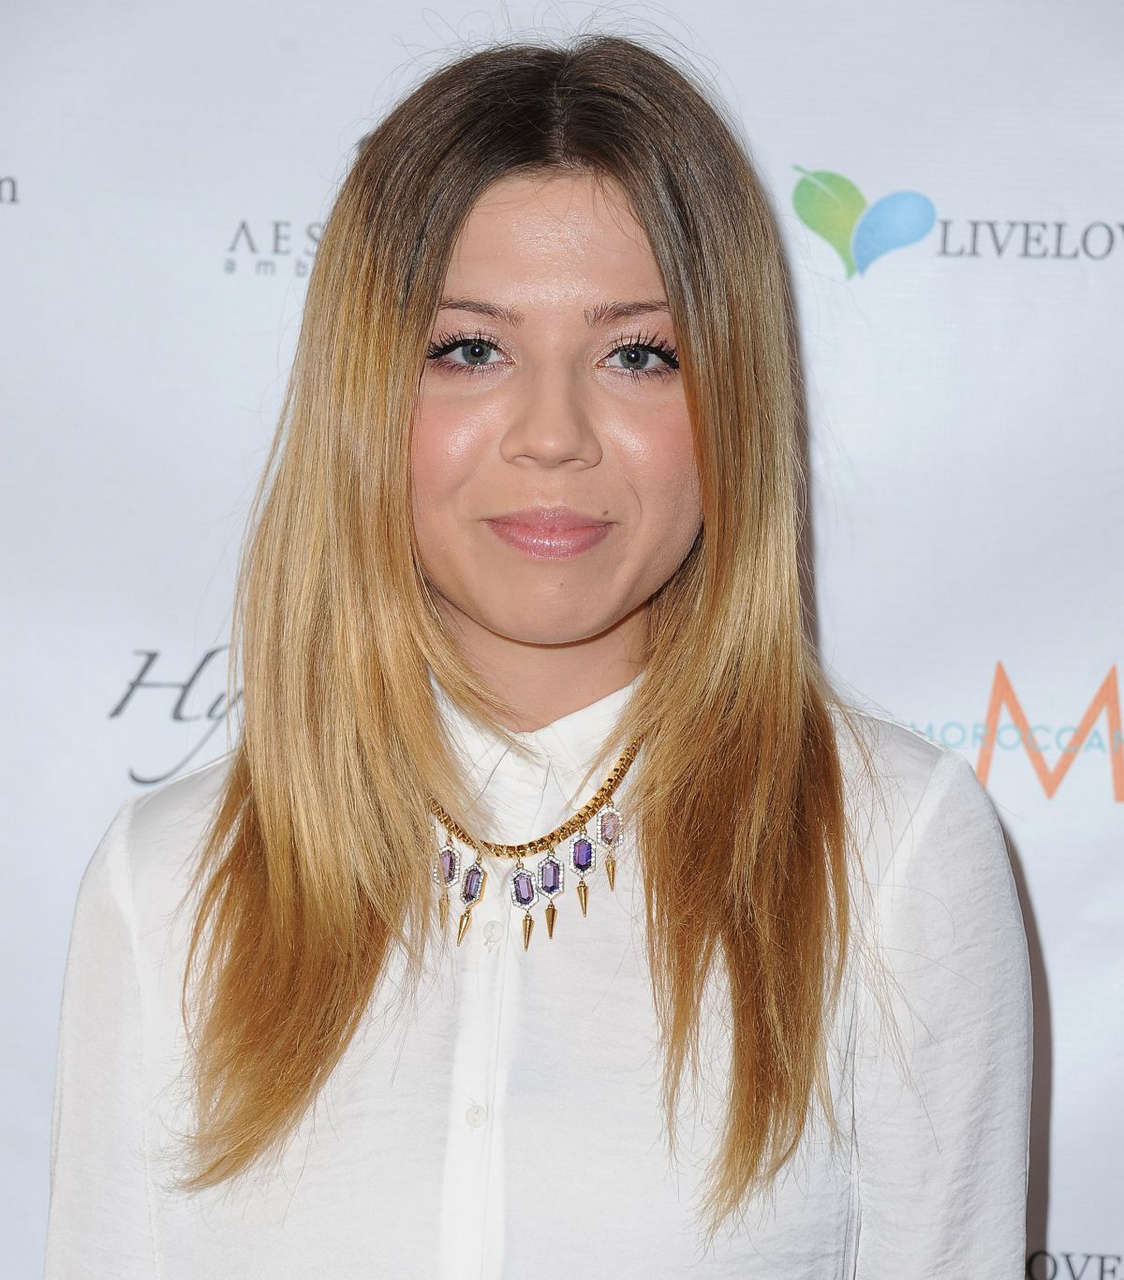 Jennette Mccurdy Splash An Exclusive Media Event By Live Love Spa